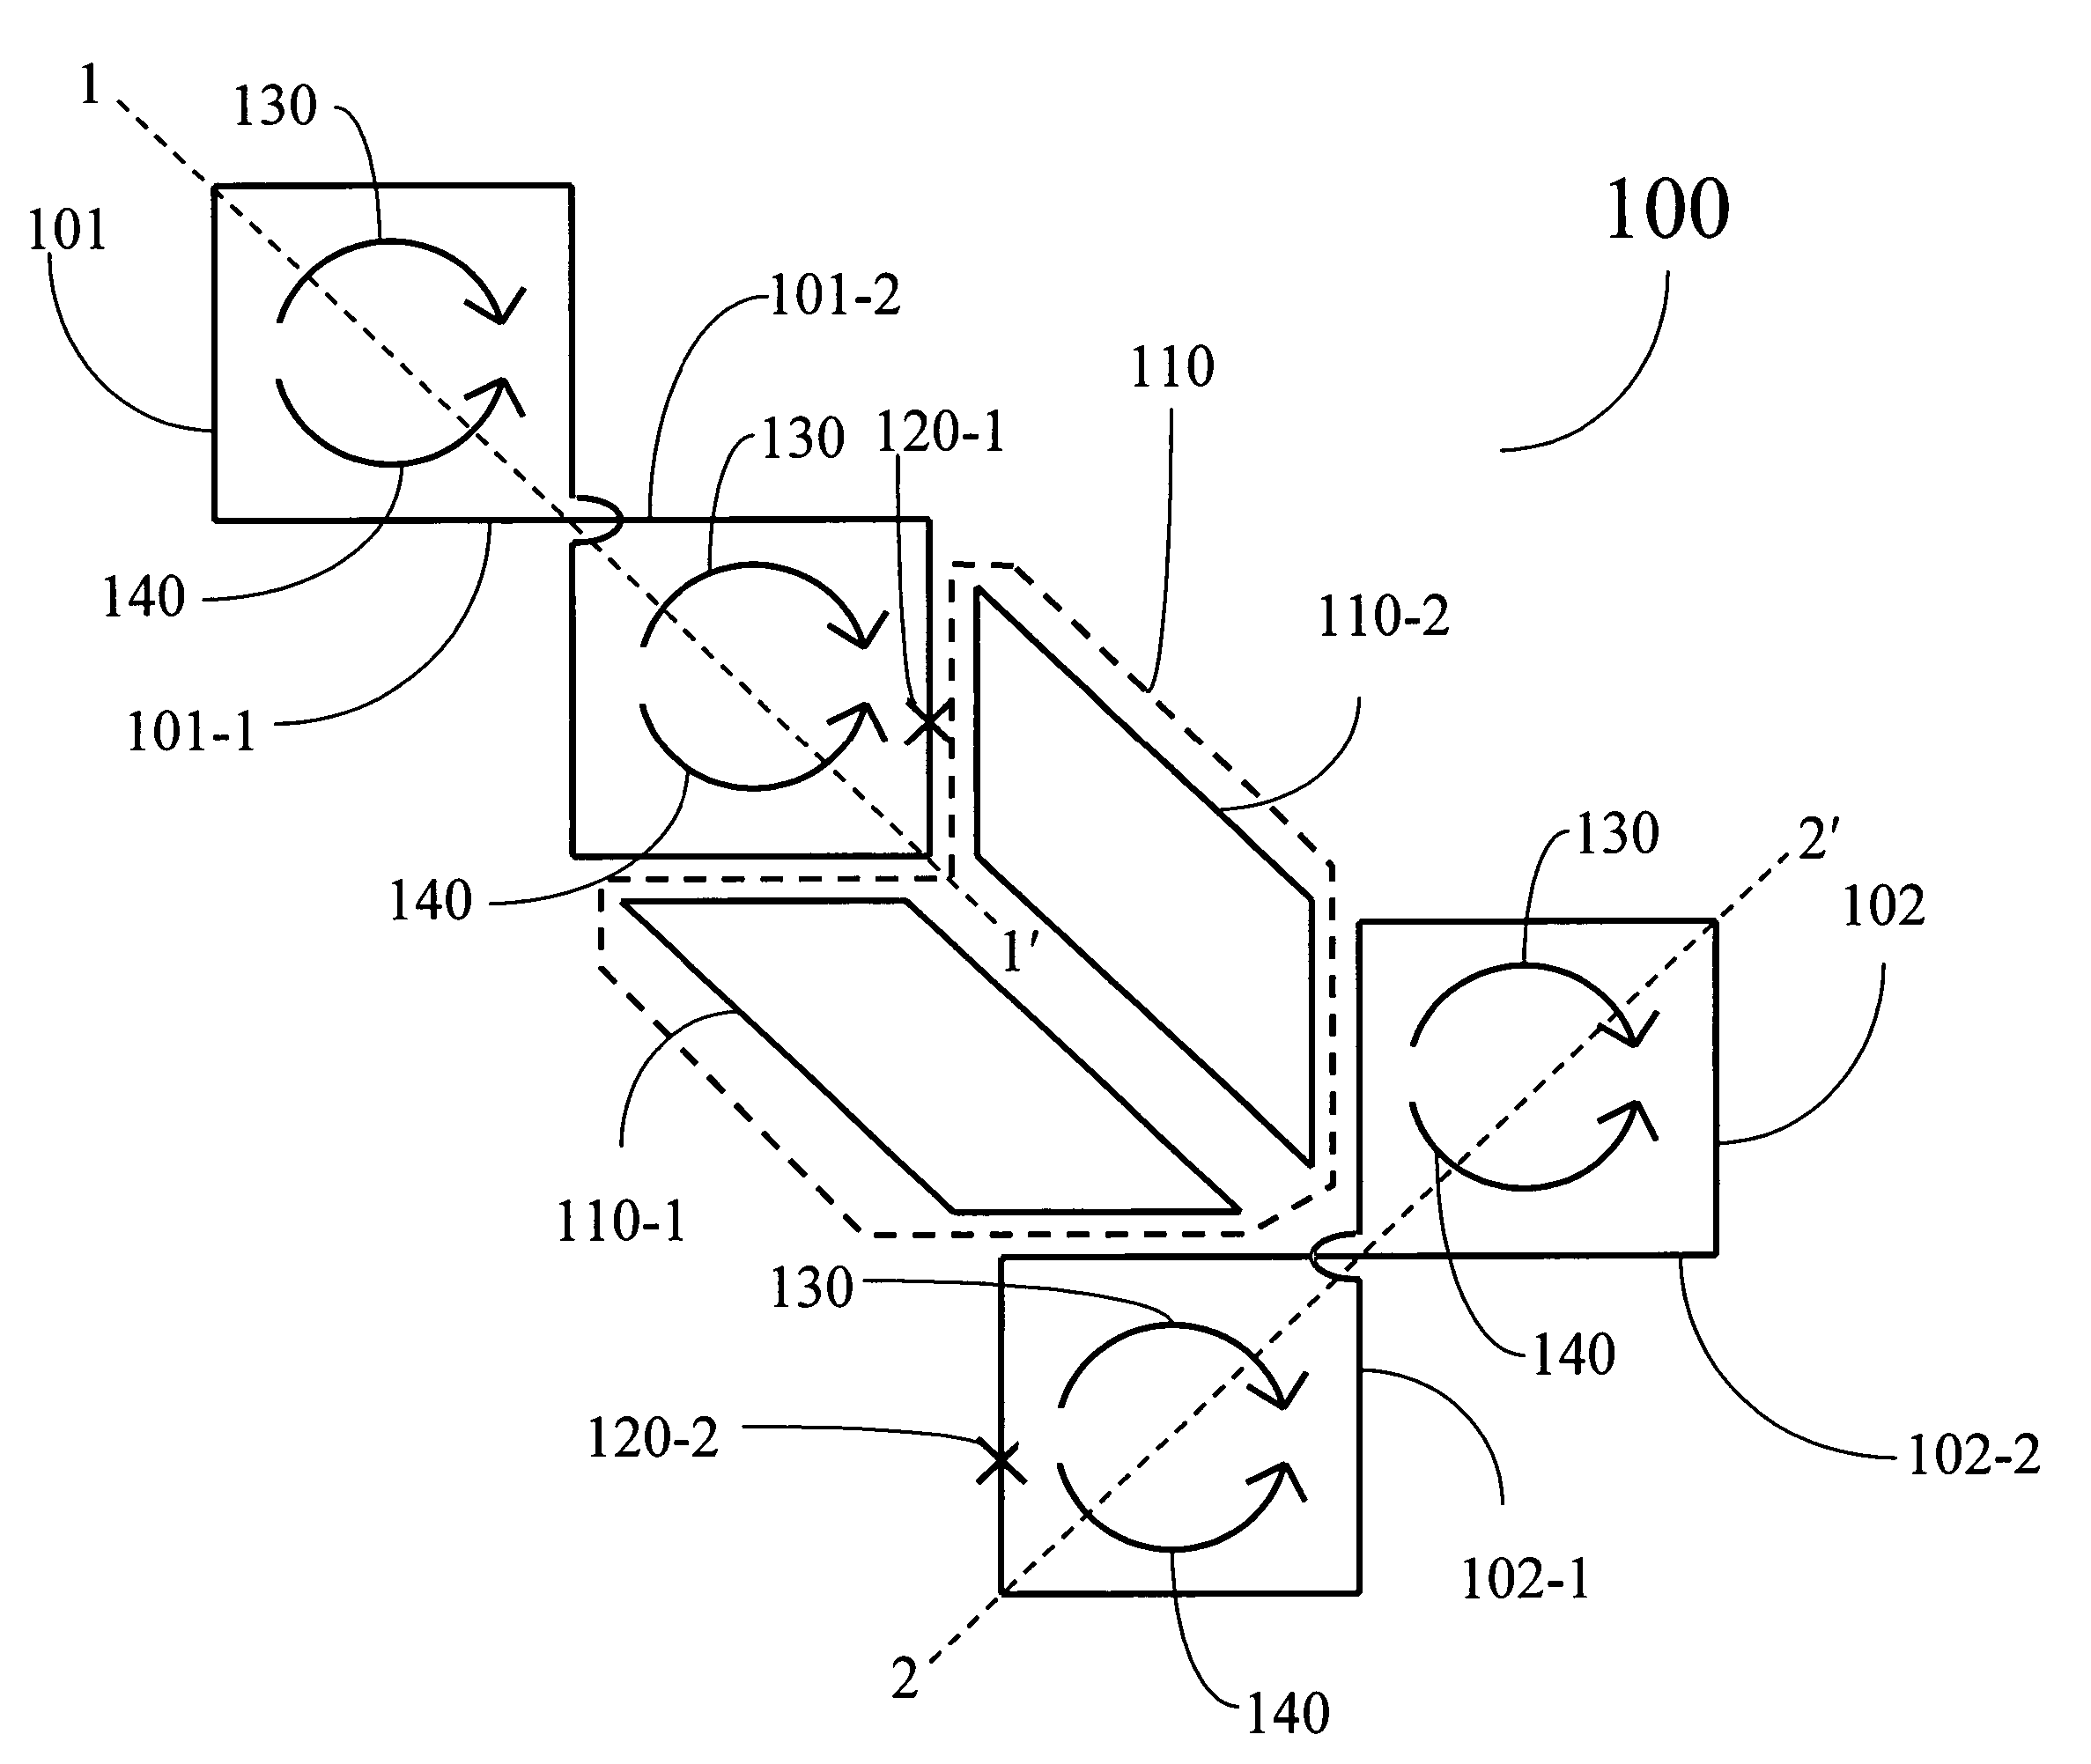 Coupling methods and architectures for information processing